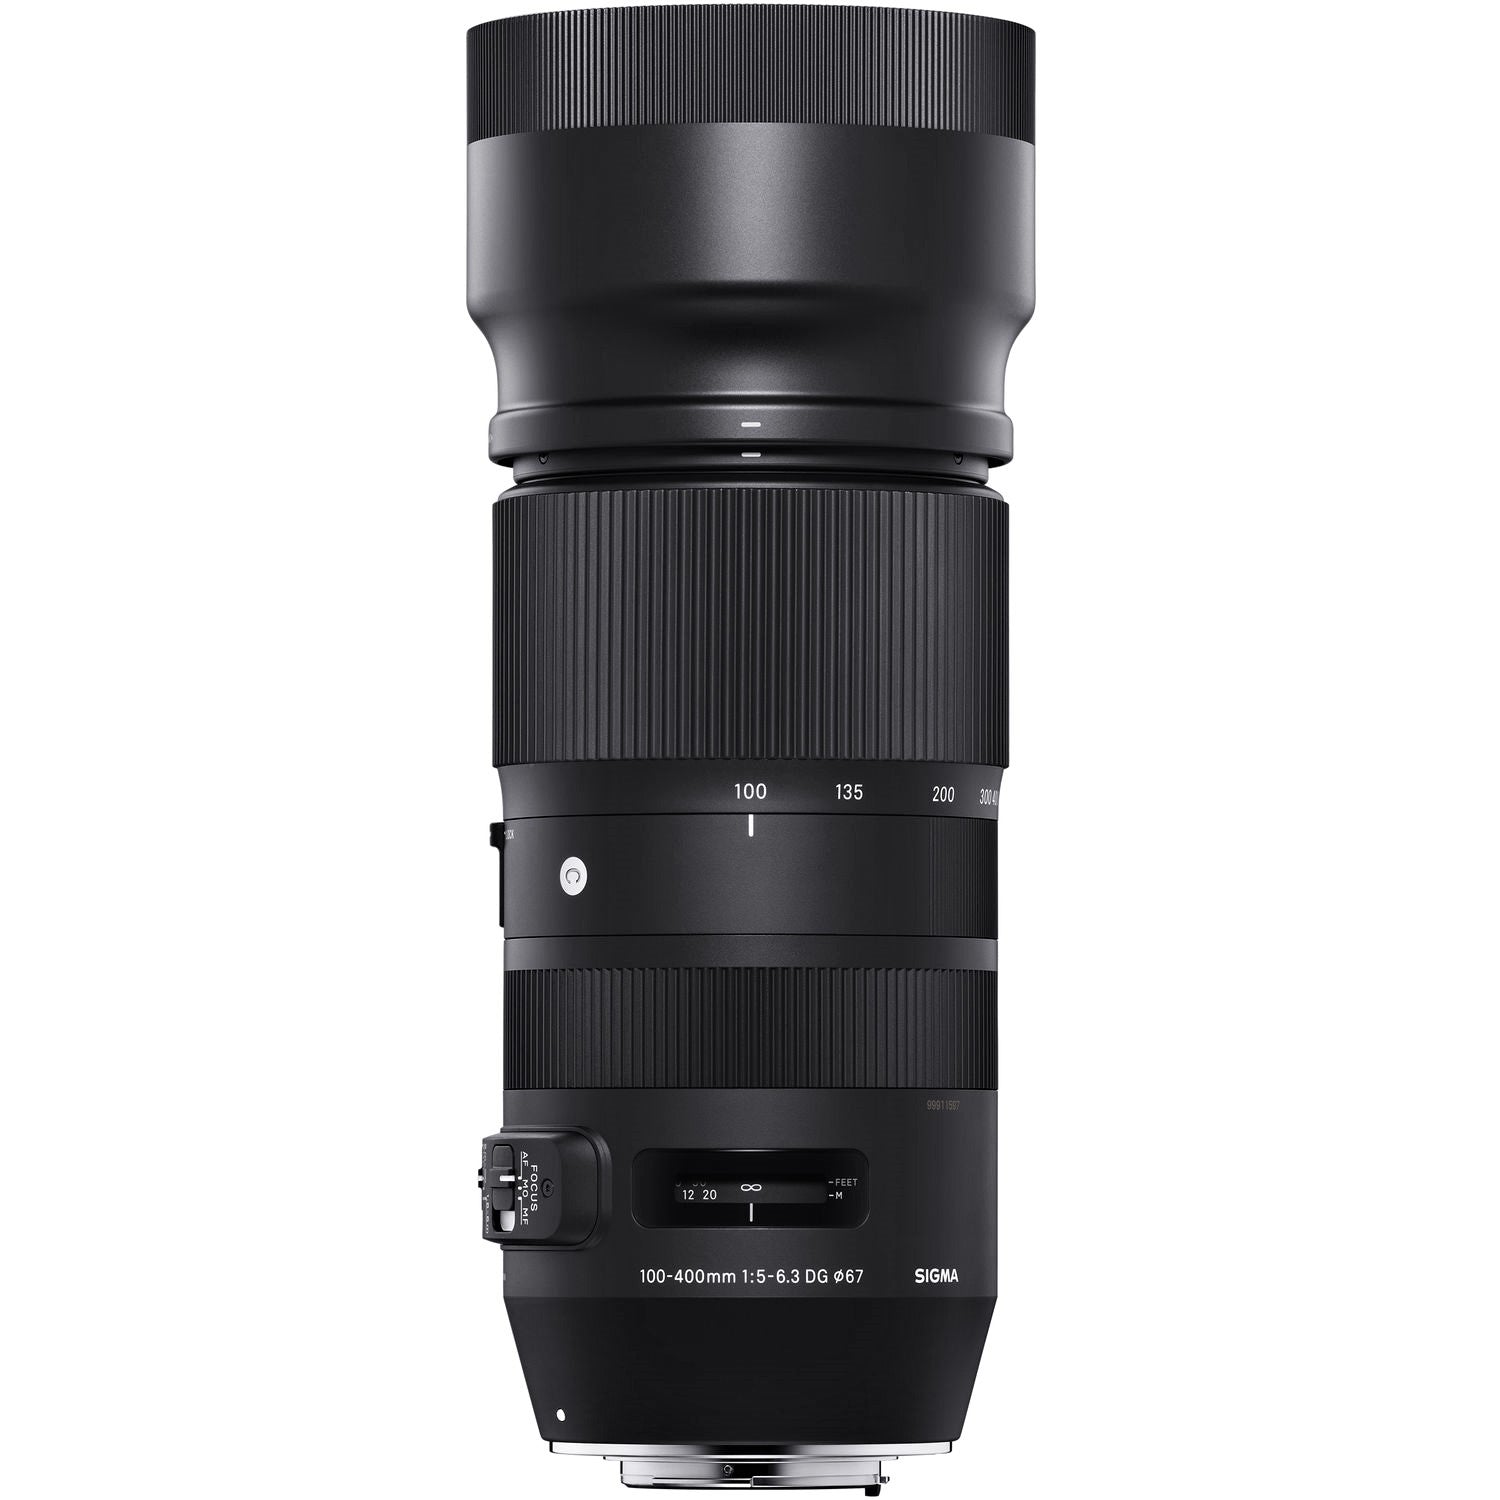 Sigma 100-400mm F5-6.3 DG OS HSM Contemporary Lens for Sigma SA with Attached Lens Hood on the Top